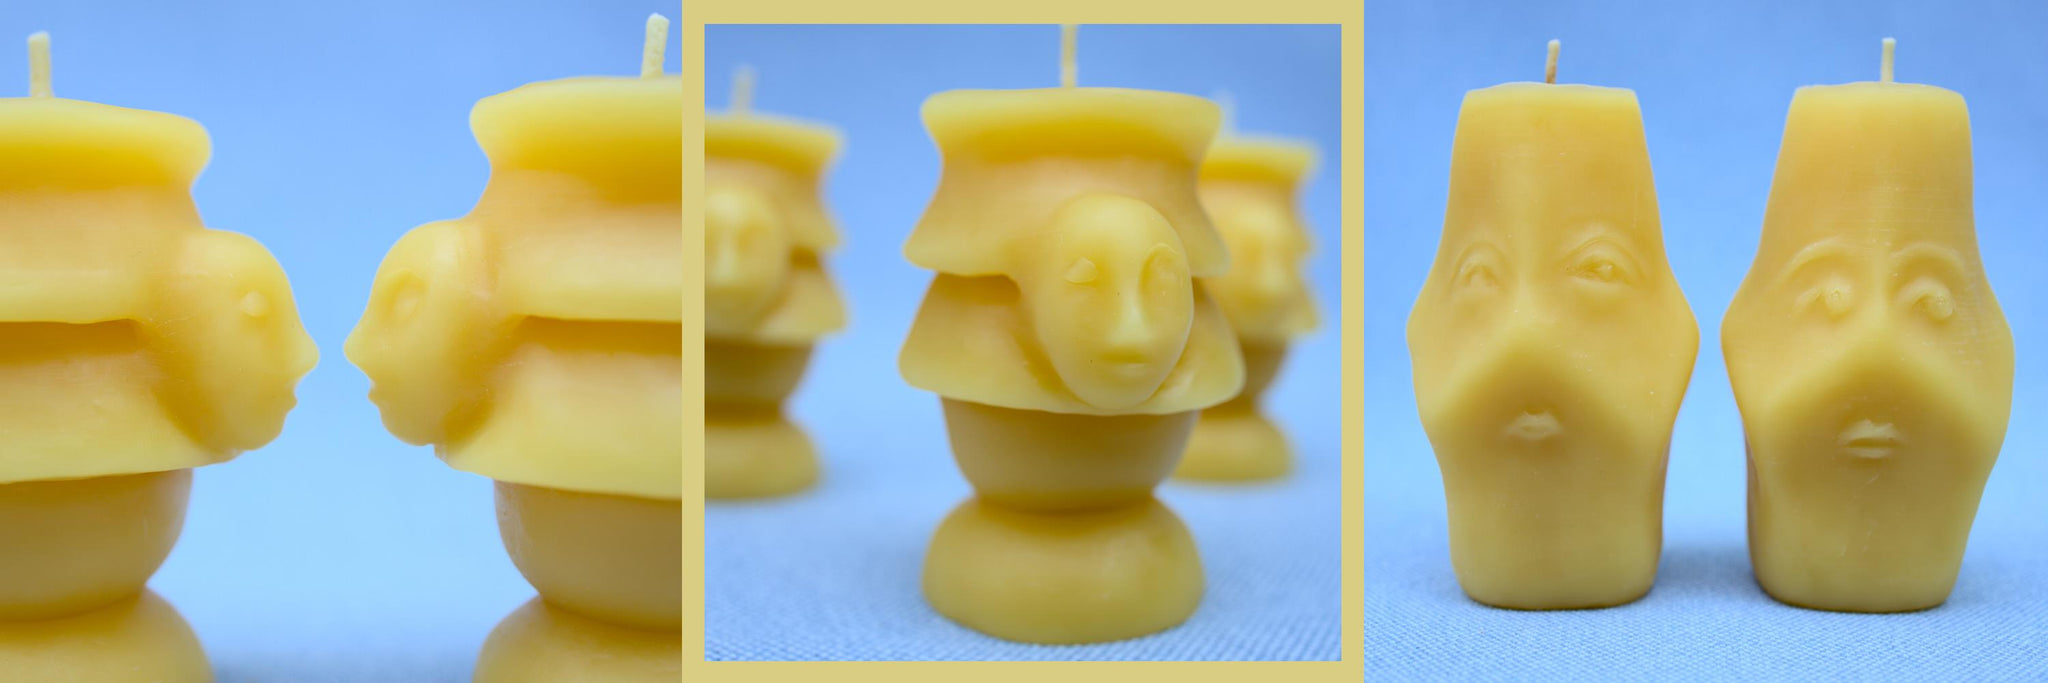 Handmade beeswax candles. Hand poured, cast in silcone molds.